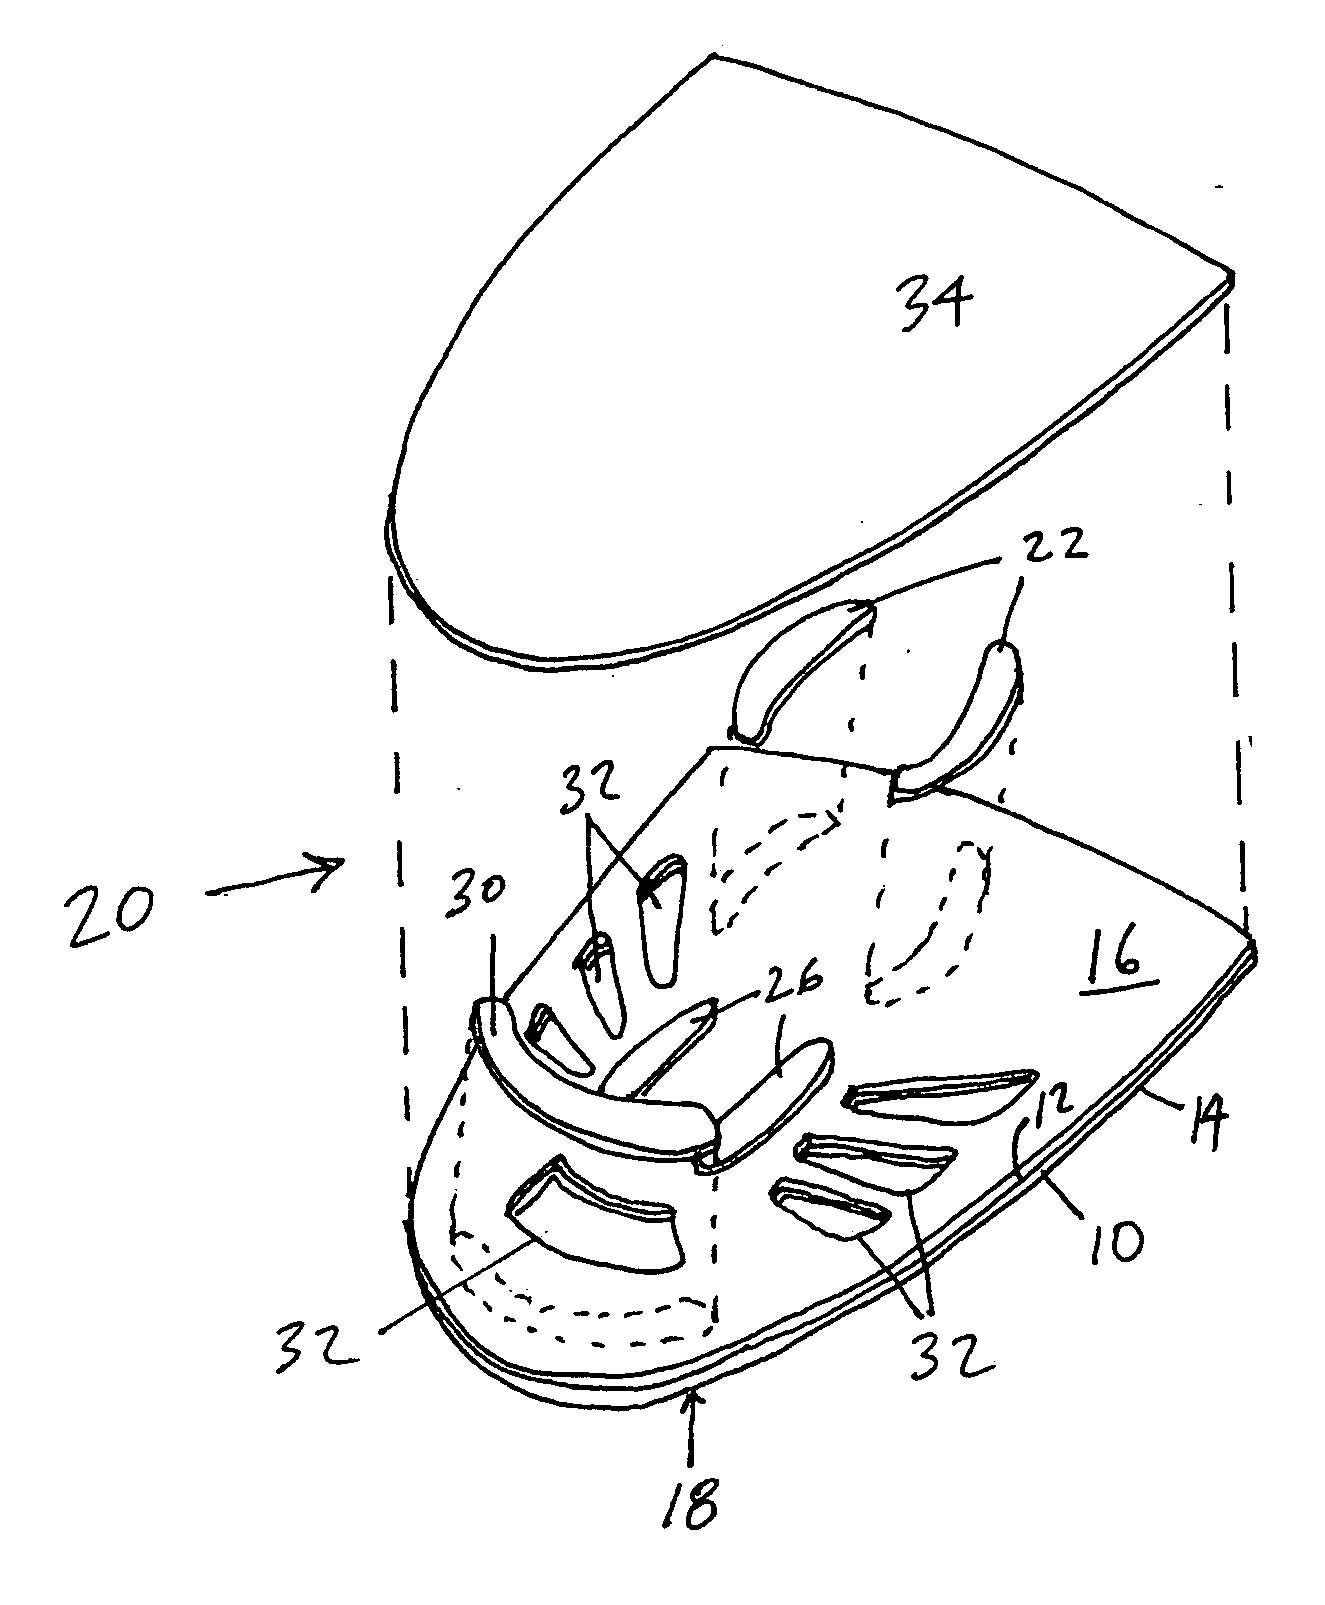 Method of manufacturing an upper for an article of footwear